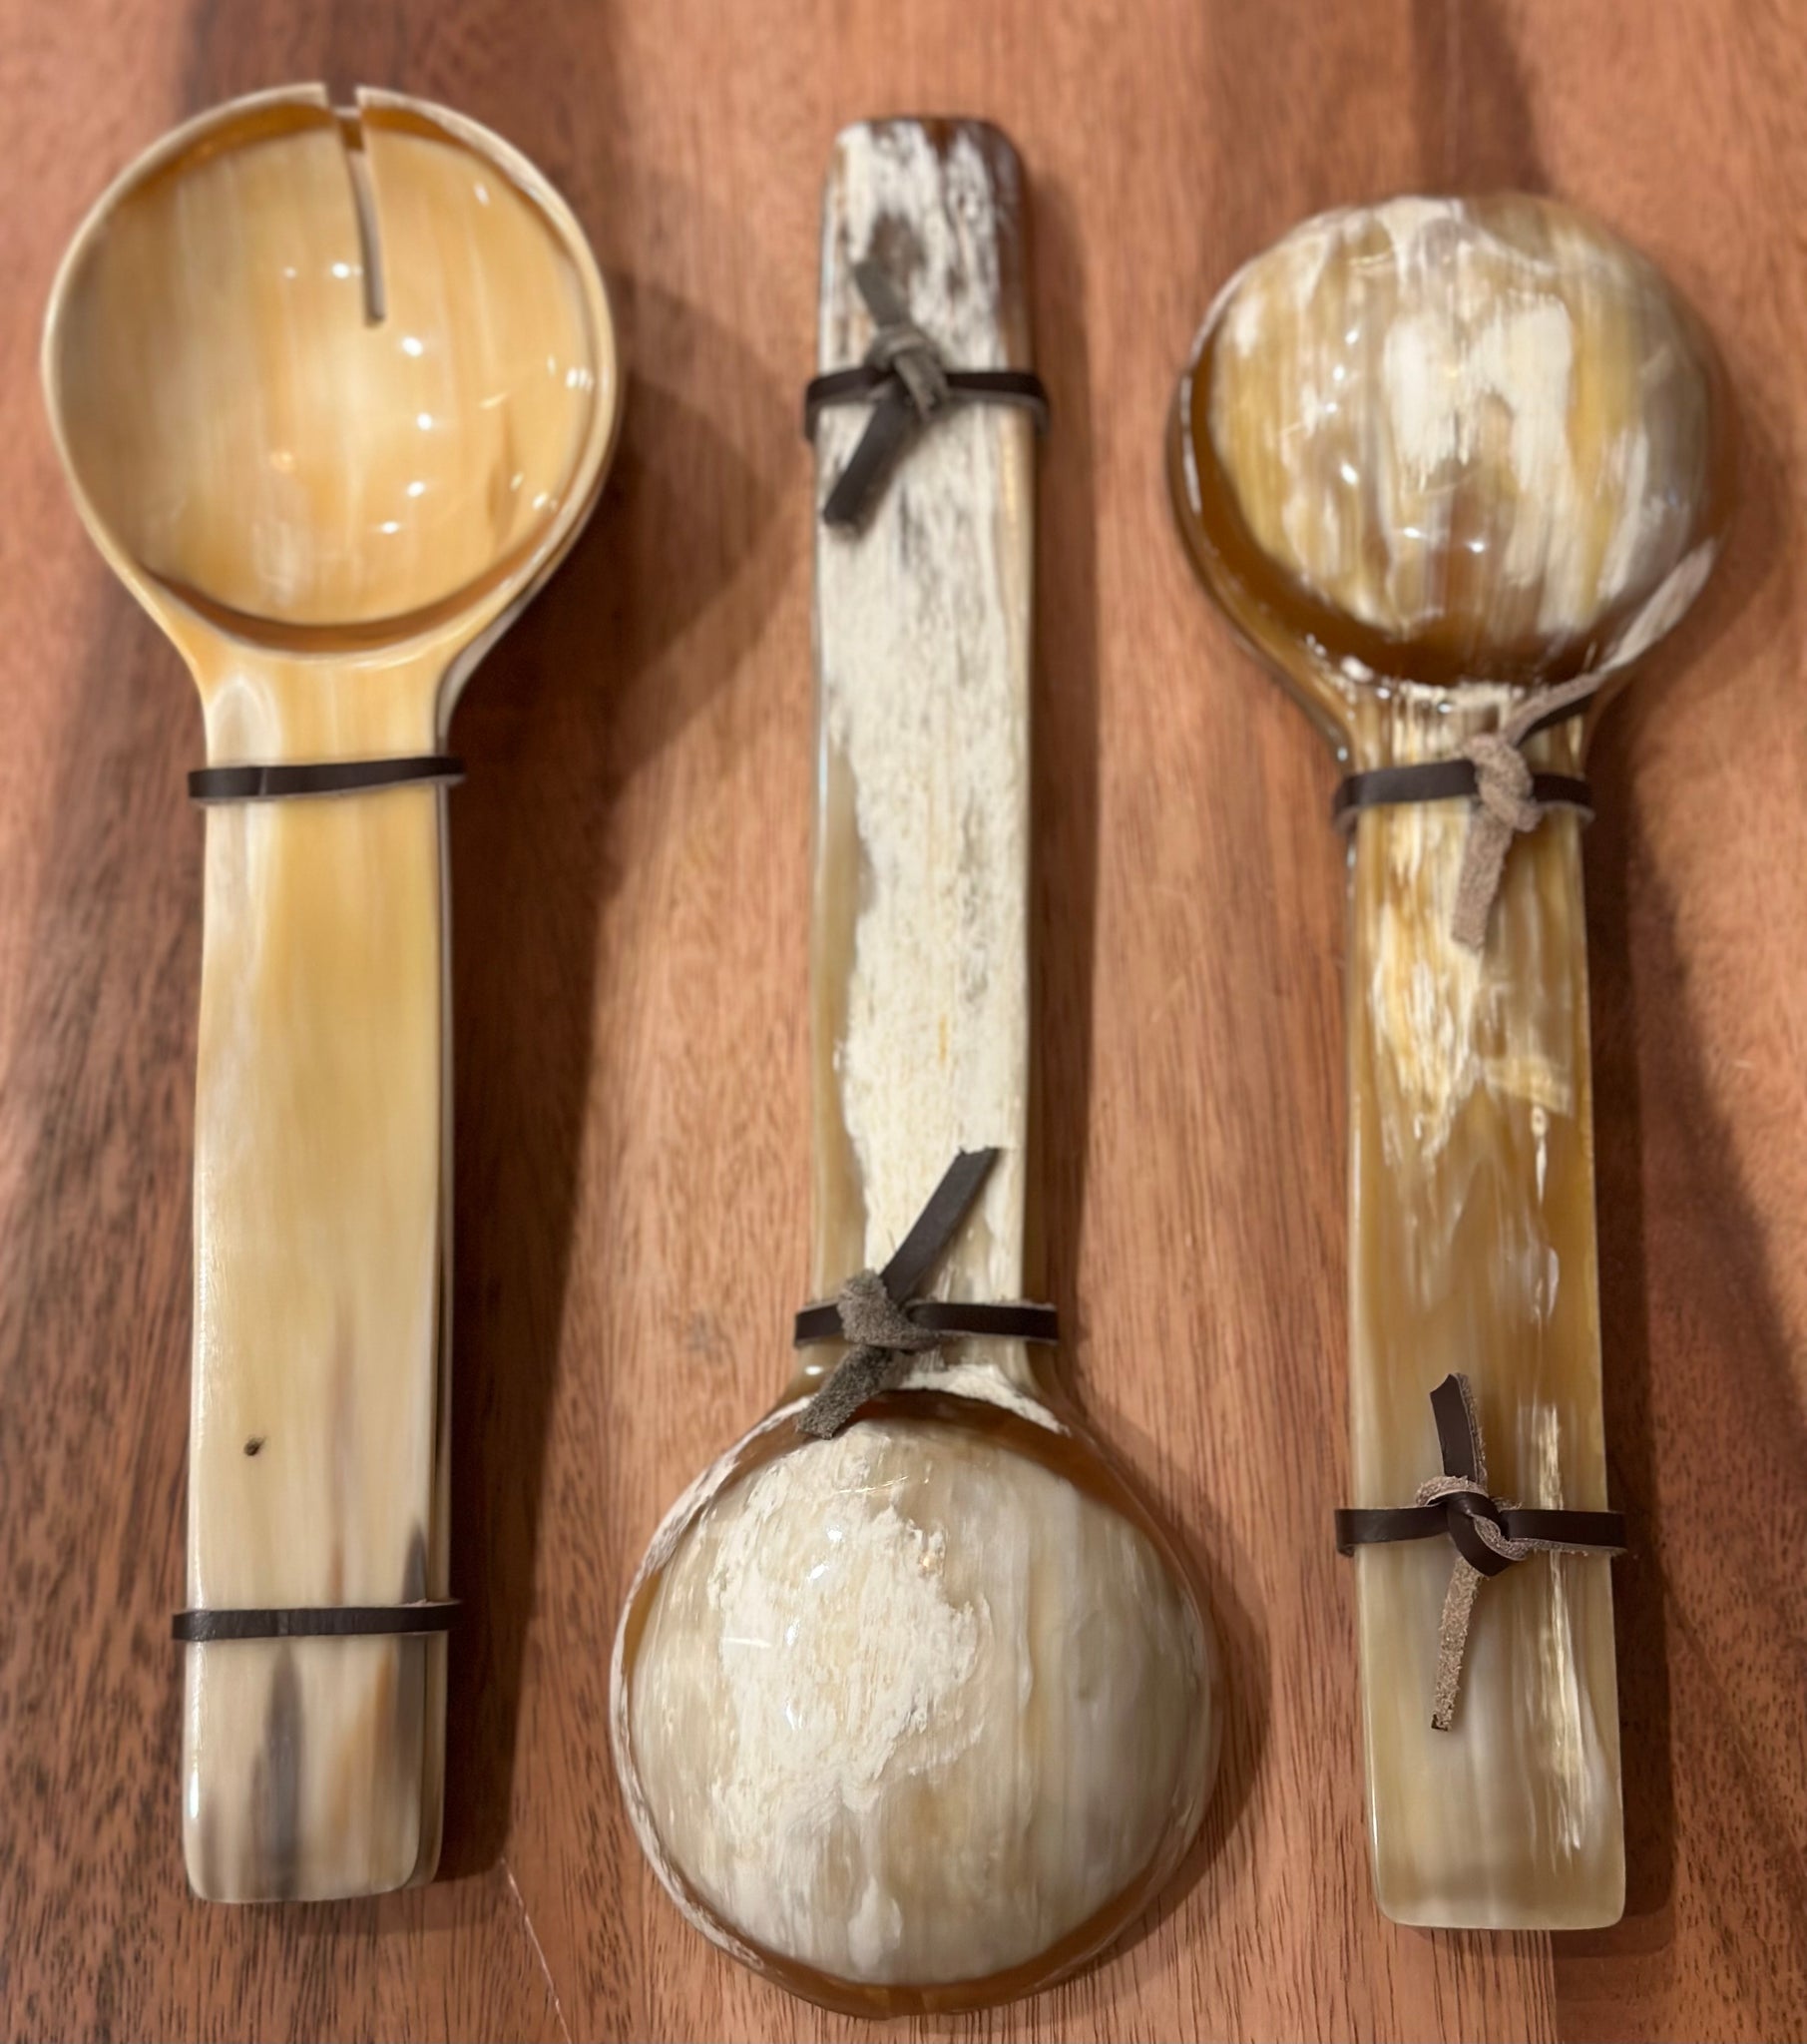 ANKOLE COW HORN SALAD OR SERVING SPOON SET OF 2 – THE AFRICAN HOME GOODS